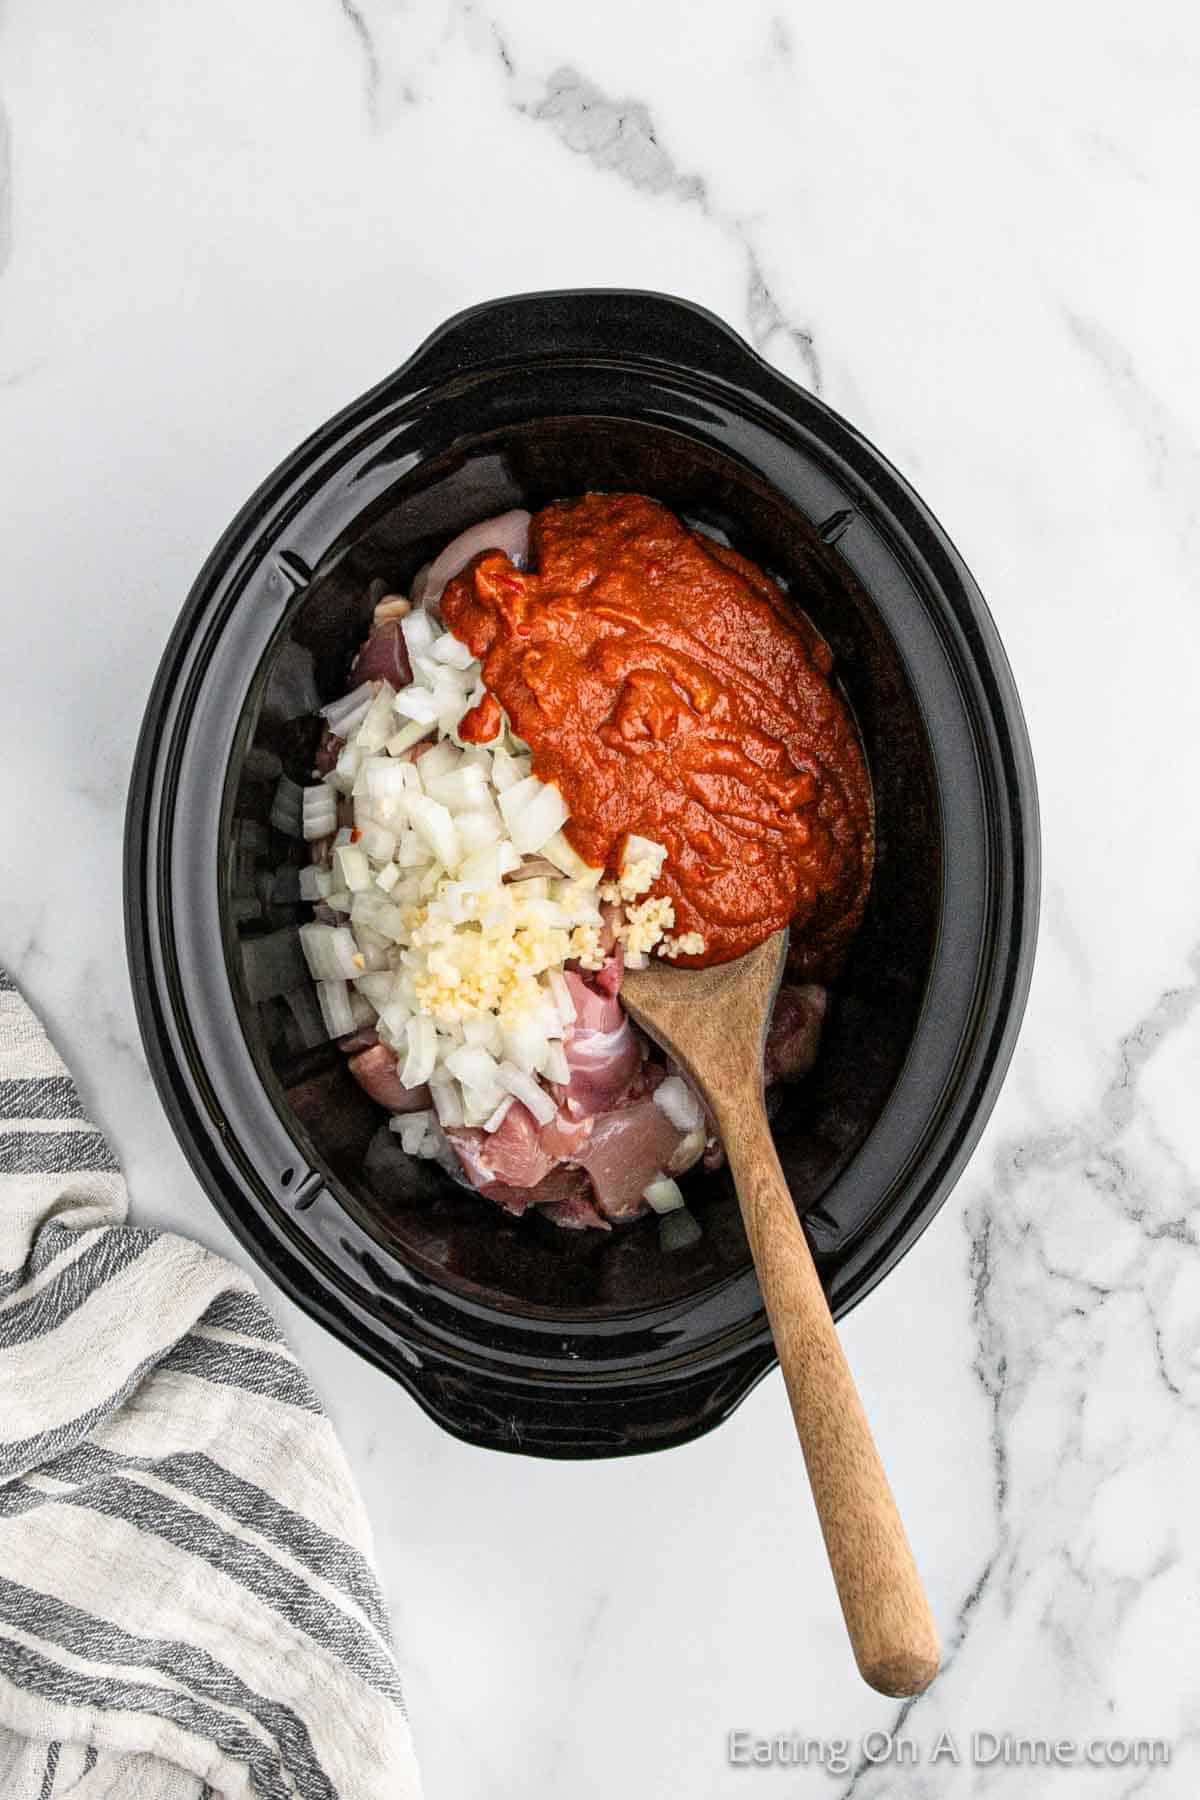 Placing chicken in the slow cooker and topped with the sauce ingredients